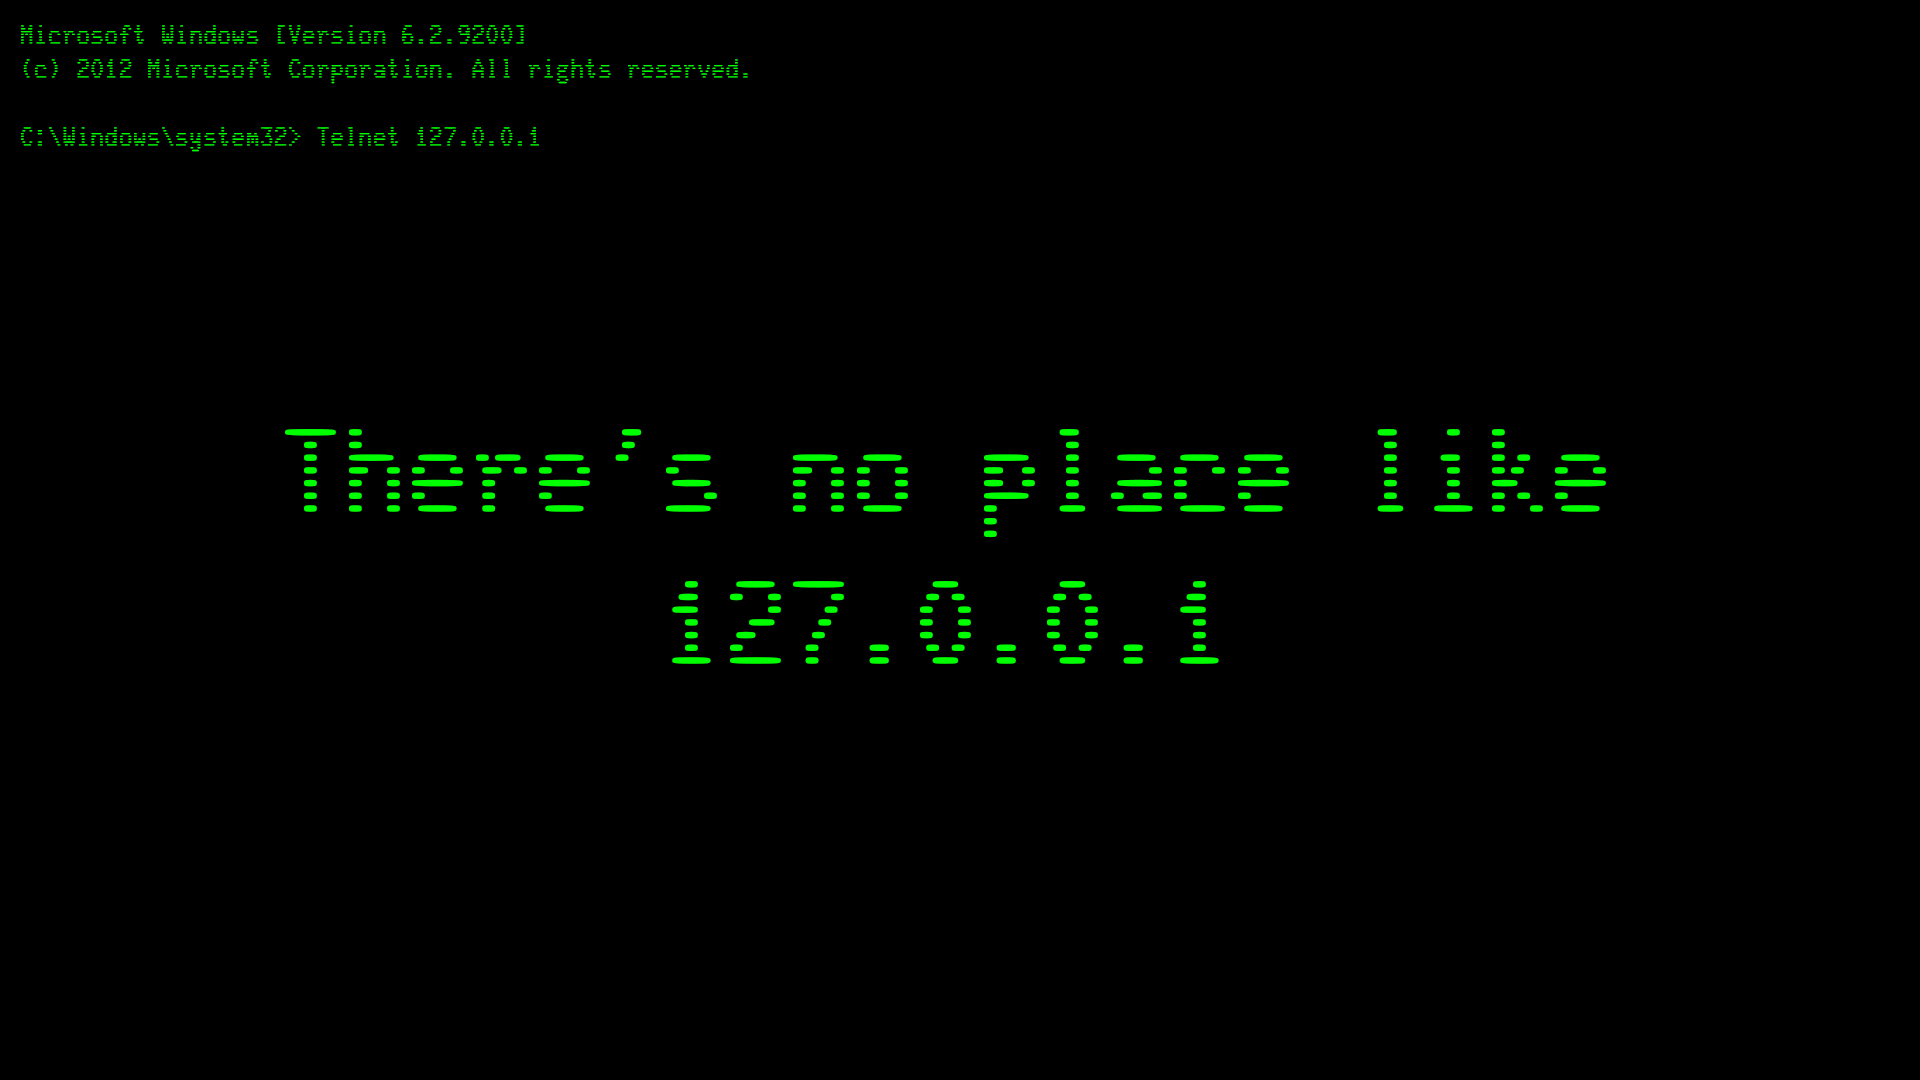 TECH::There’s no place like 127.0.0.1. (But for everywhere else, use